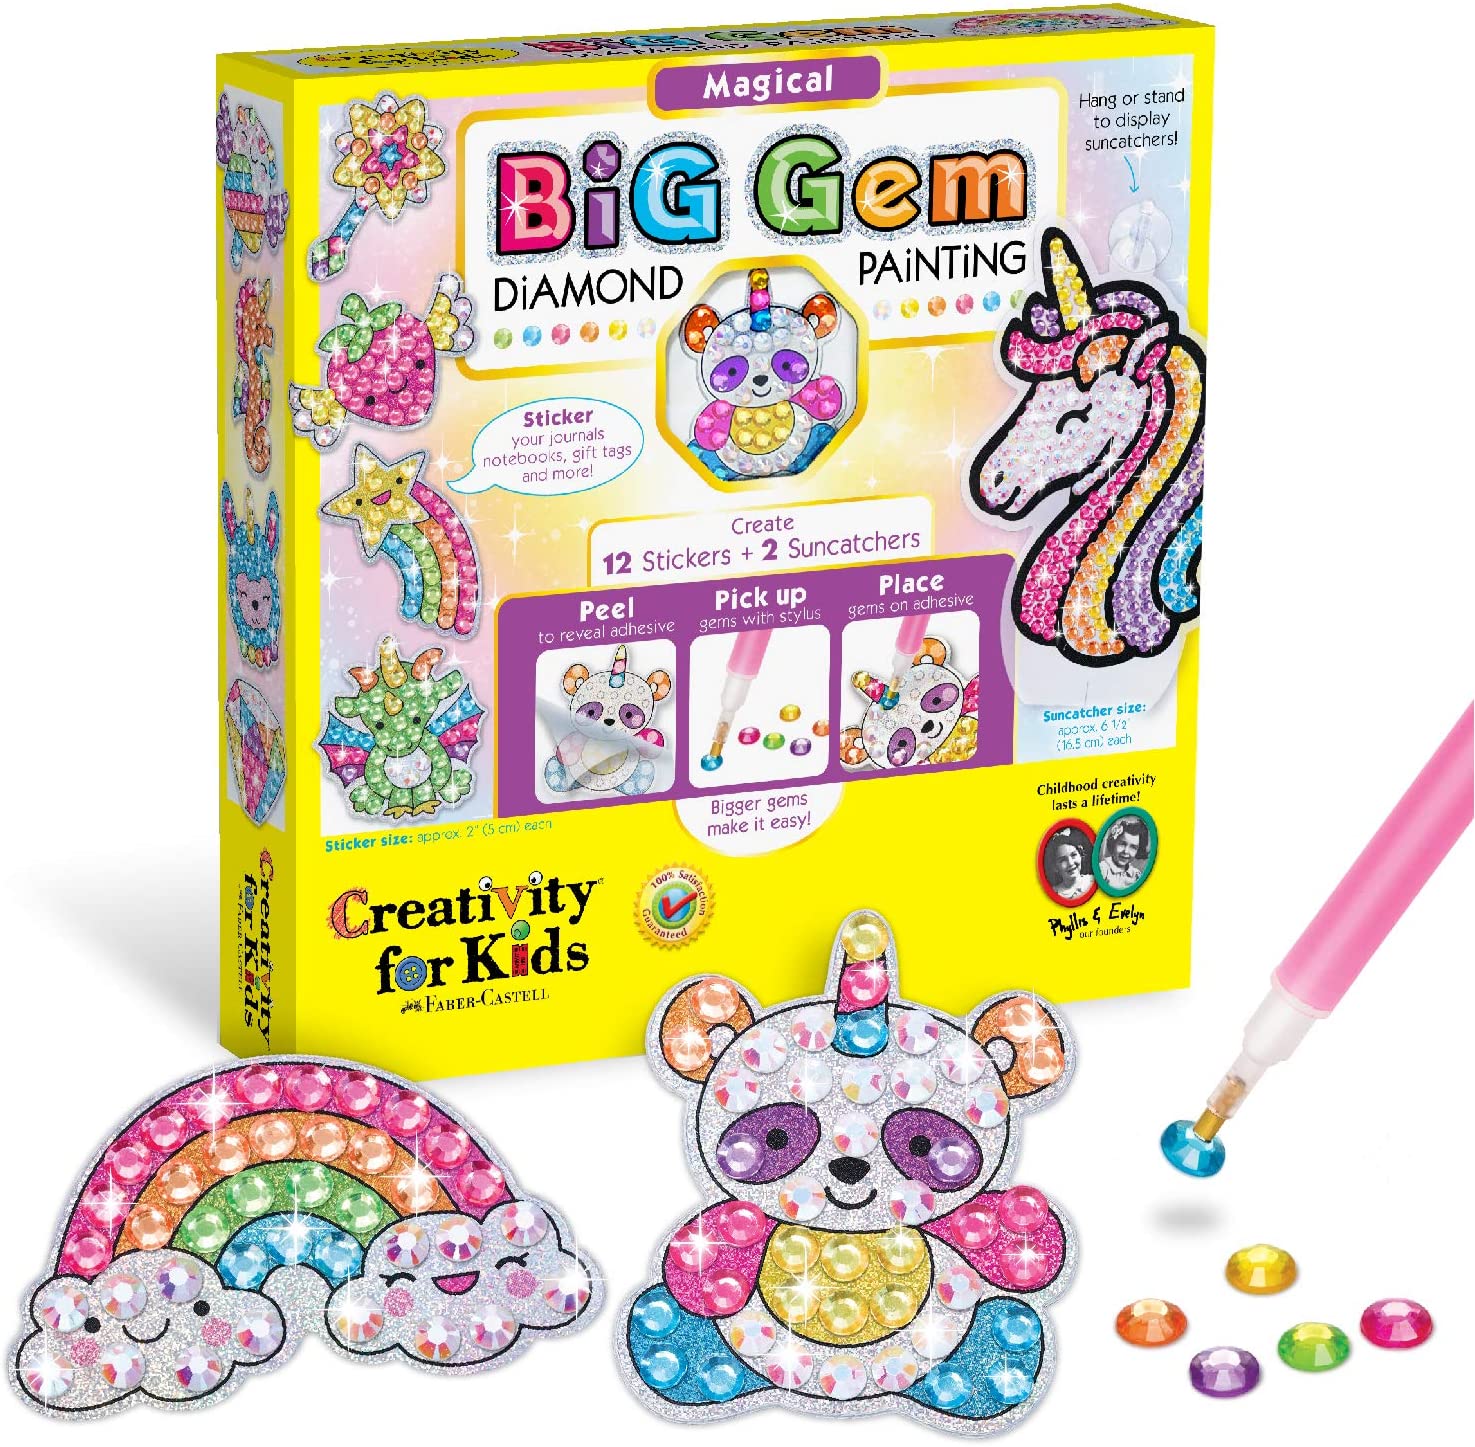 Creativity for Kids Big Gem Diamond Painting Kit for Kids - Create Your Own  Magical Stickers and Suncatchers – Smartazon